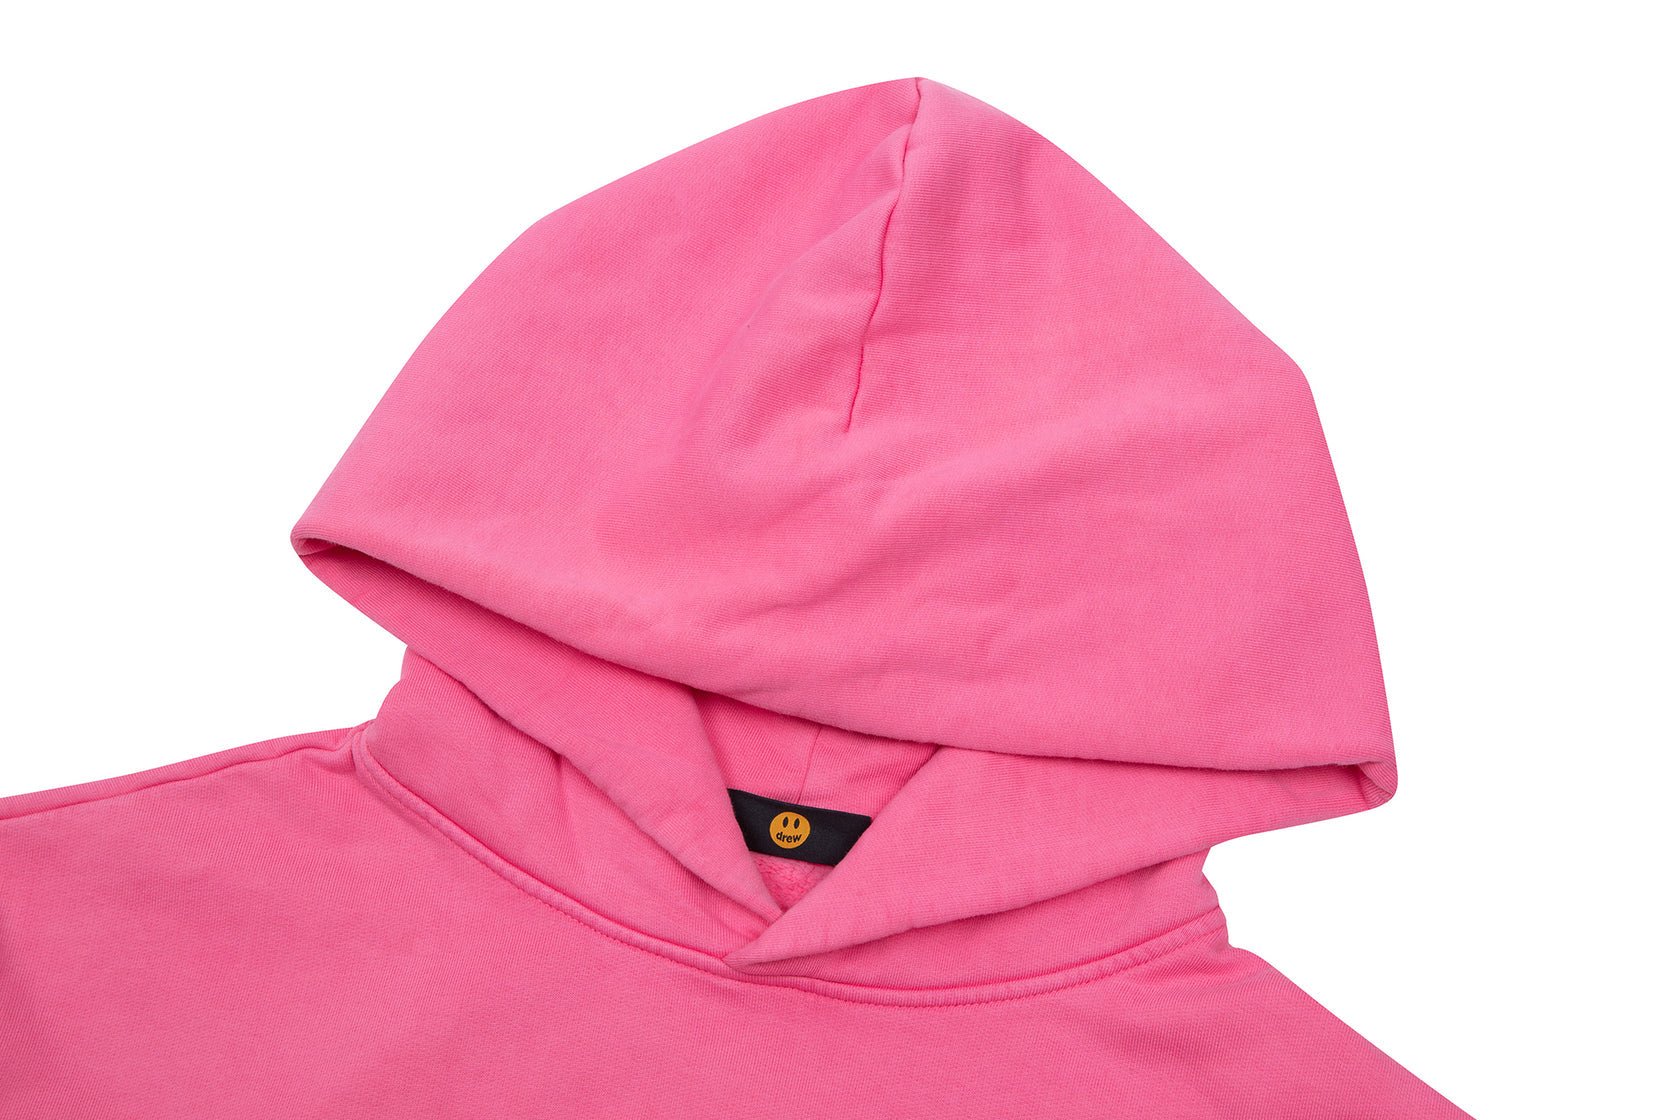 drewhouse mascot hoodie pink size S